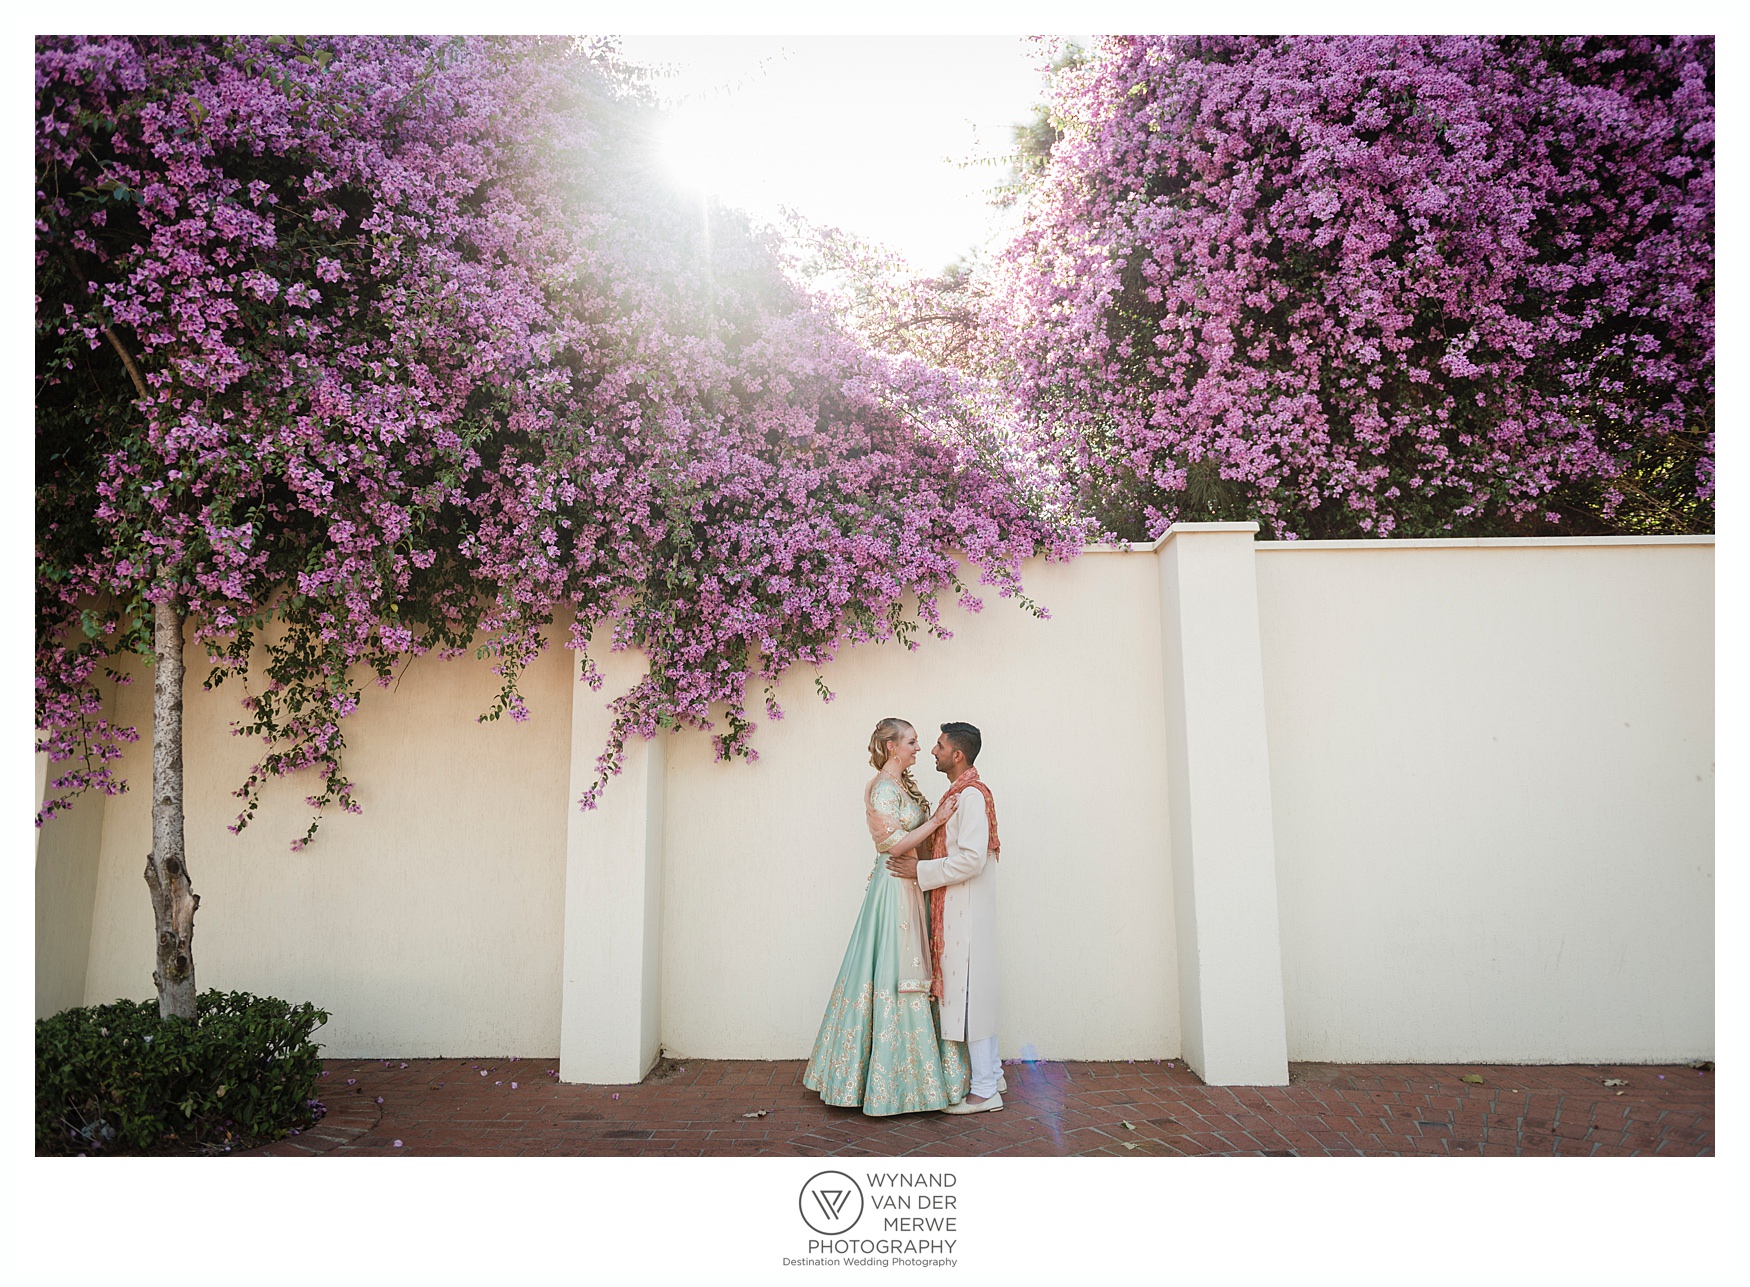 Nabeel and Jenalea's wedding at Summerplace, Hydepark